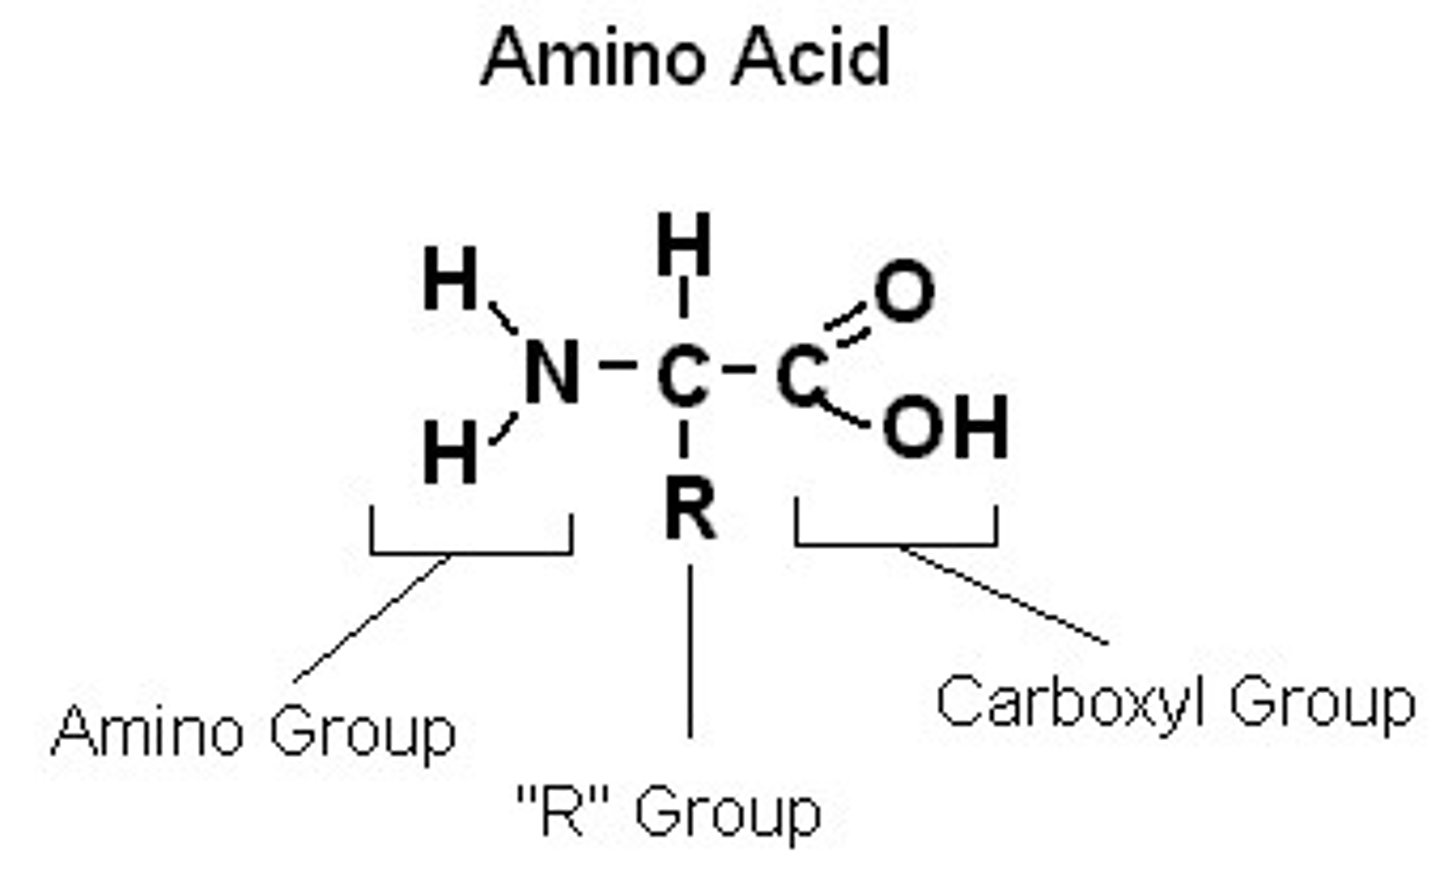 <p>- subunit of peptides/proteins</p><p>- all share the same backbone of a carboxylic acid group and amino group linked to an alpha carbon</p>